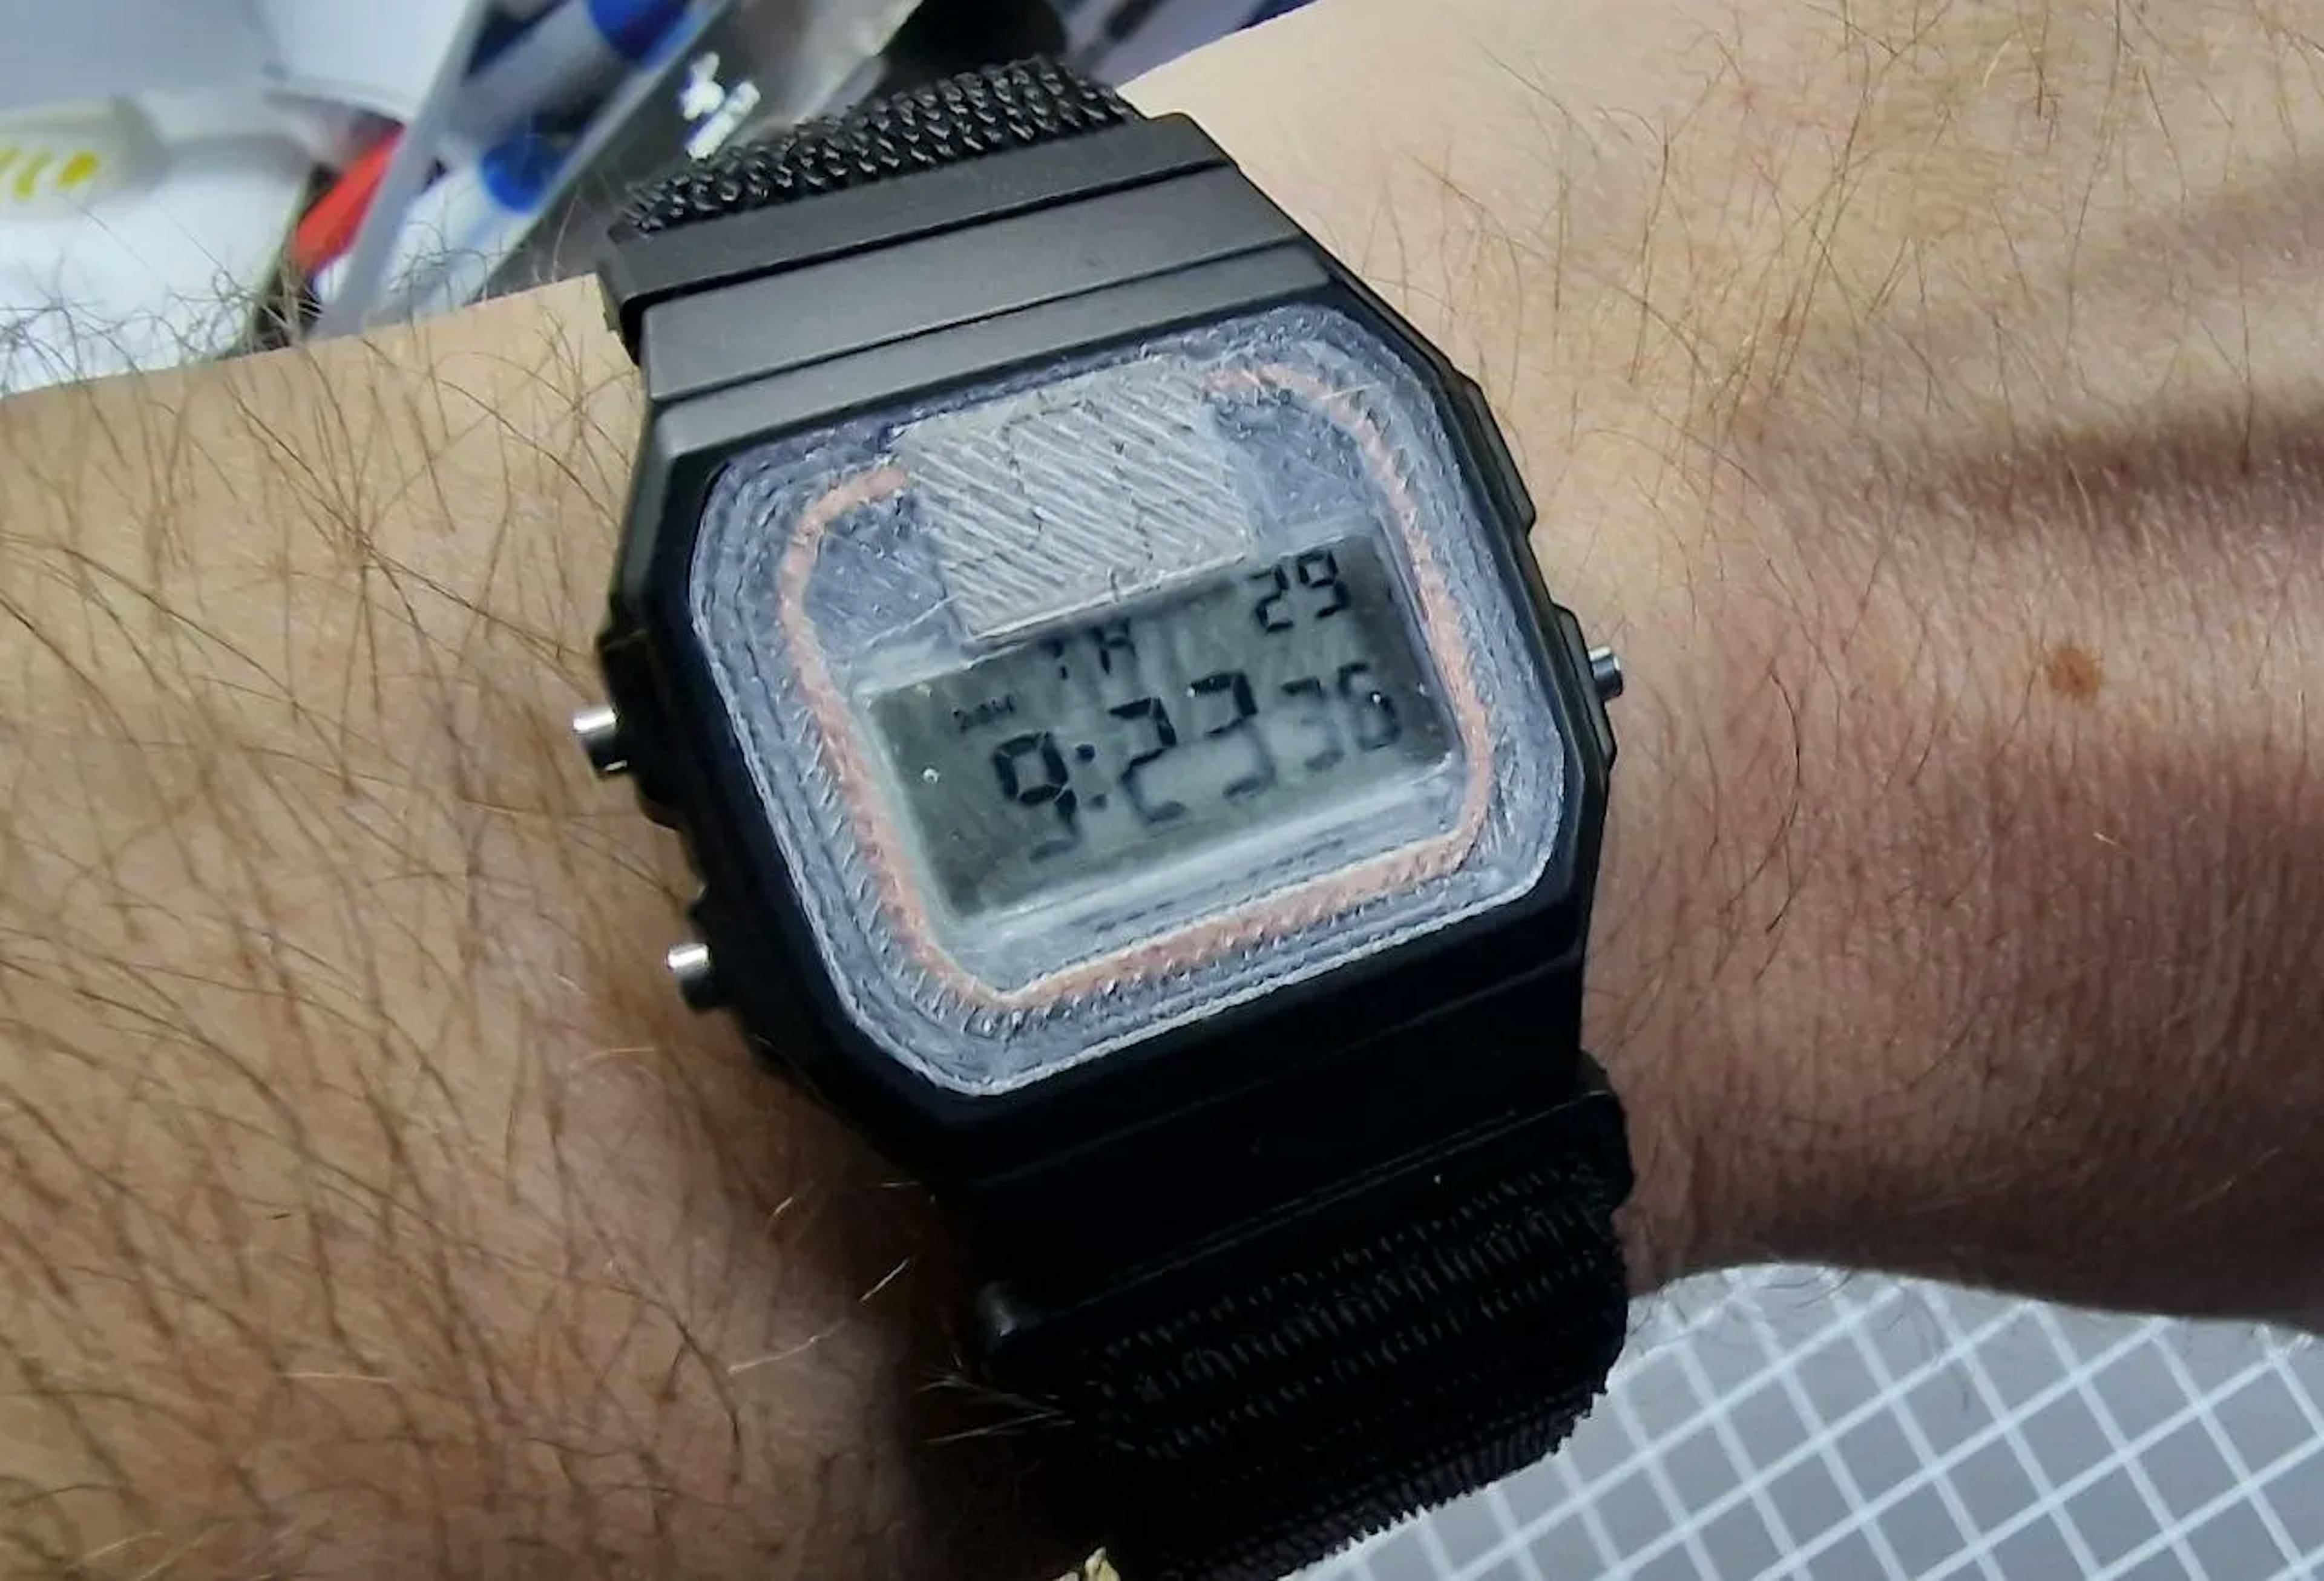 Wearing my hacked CASIO F-91W with fully functional NFC contactless payment card embedded